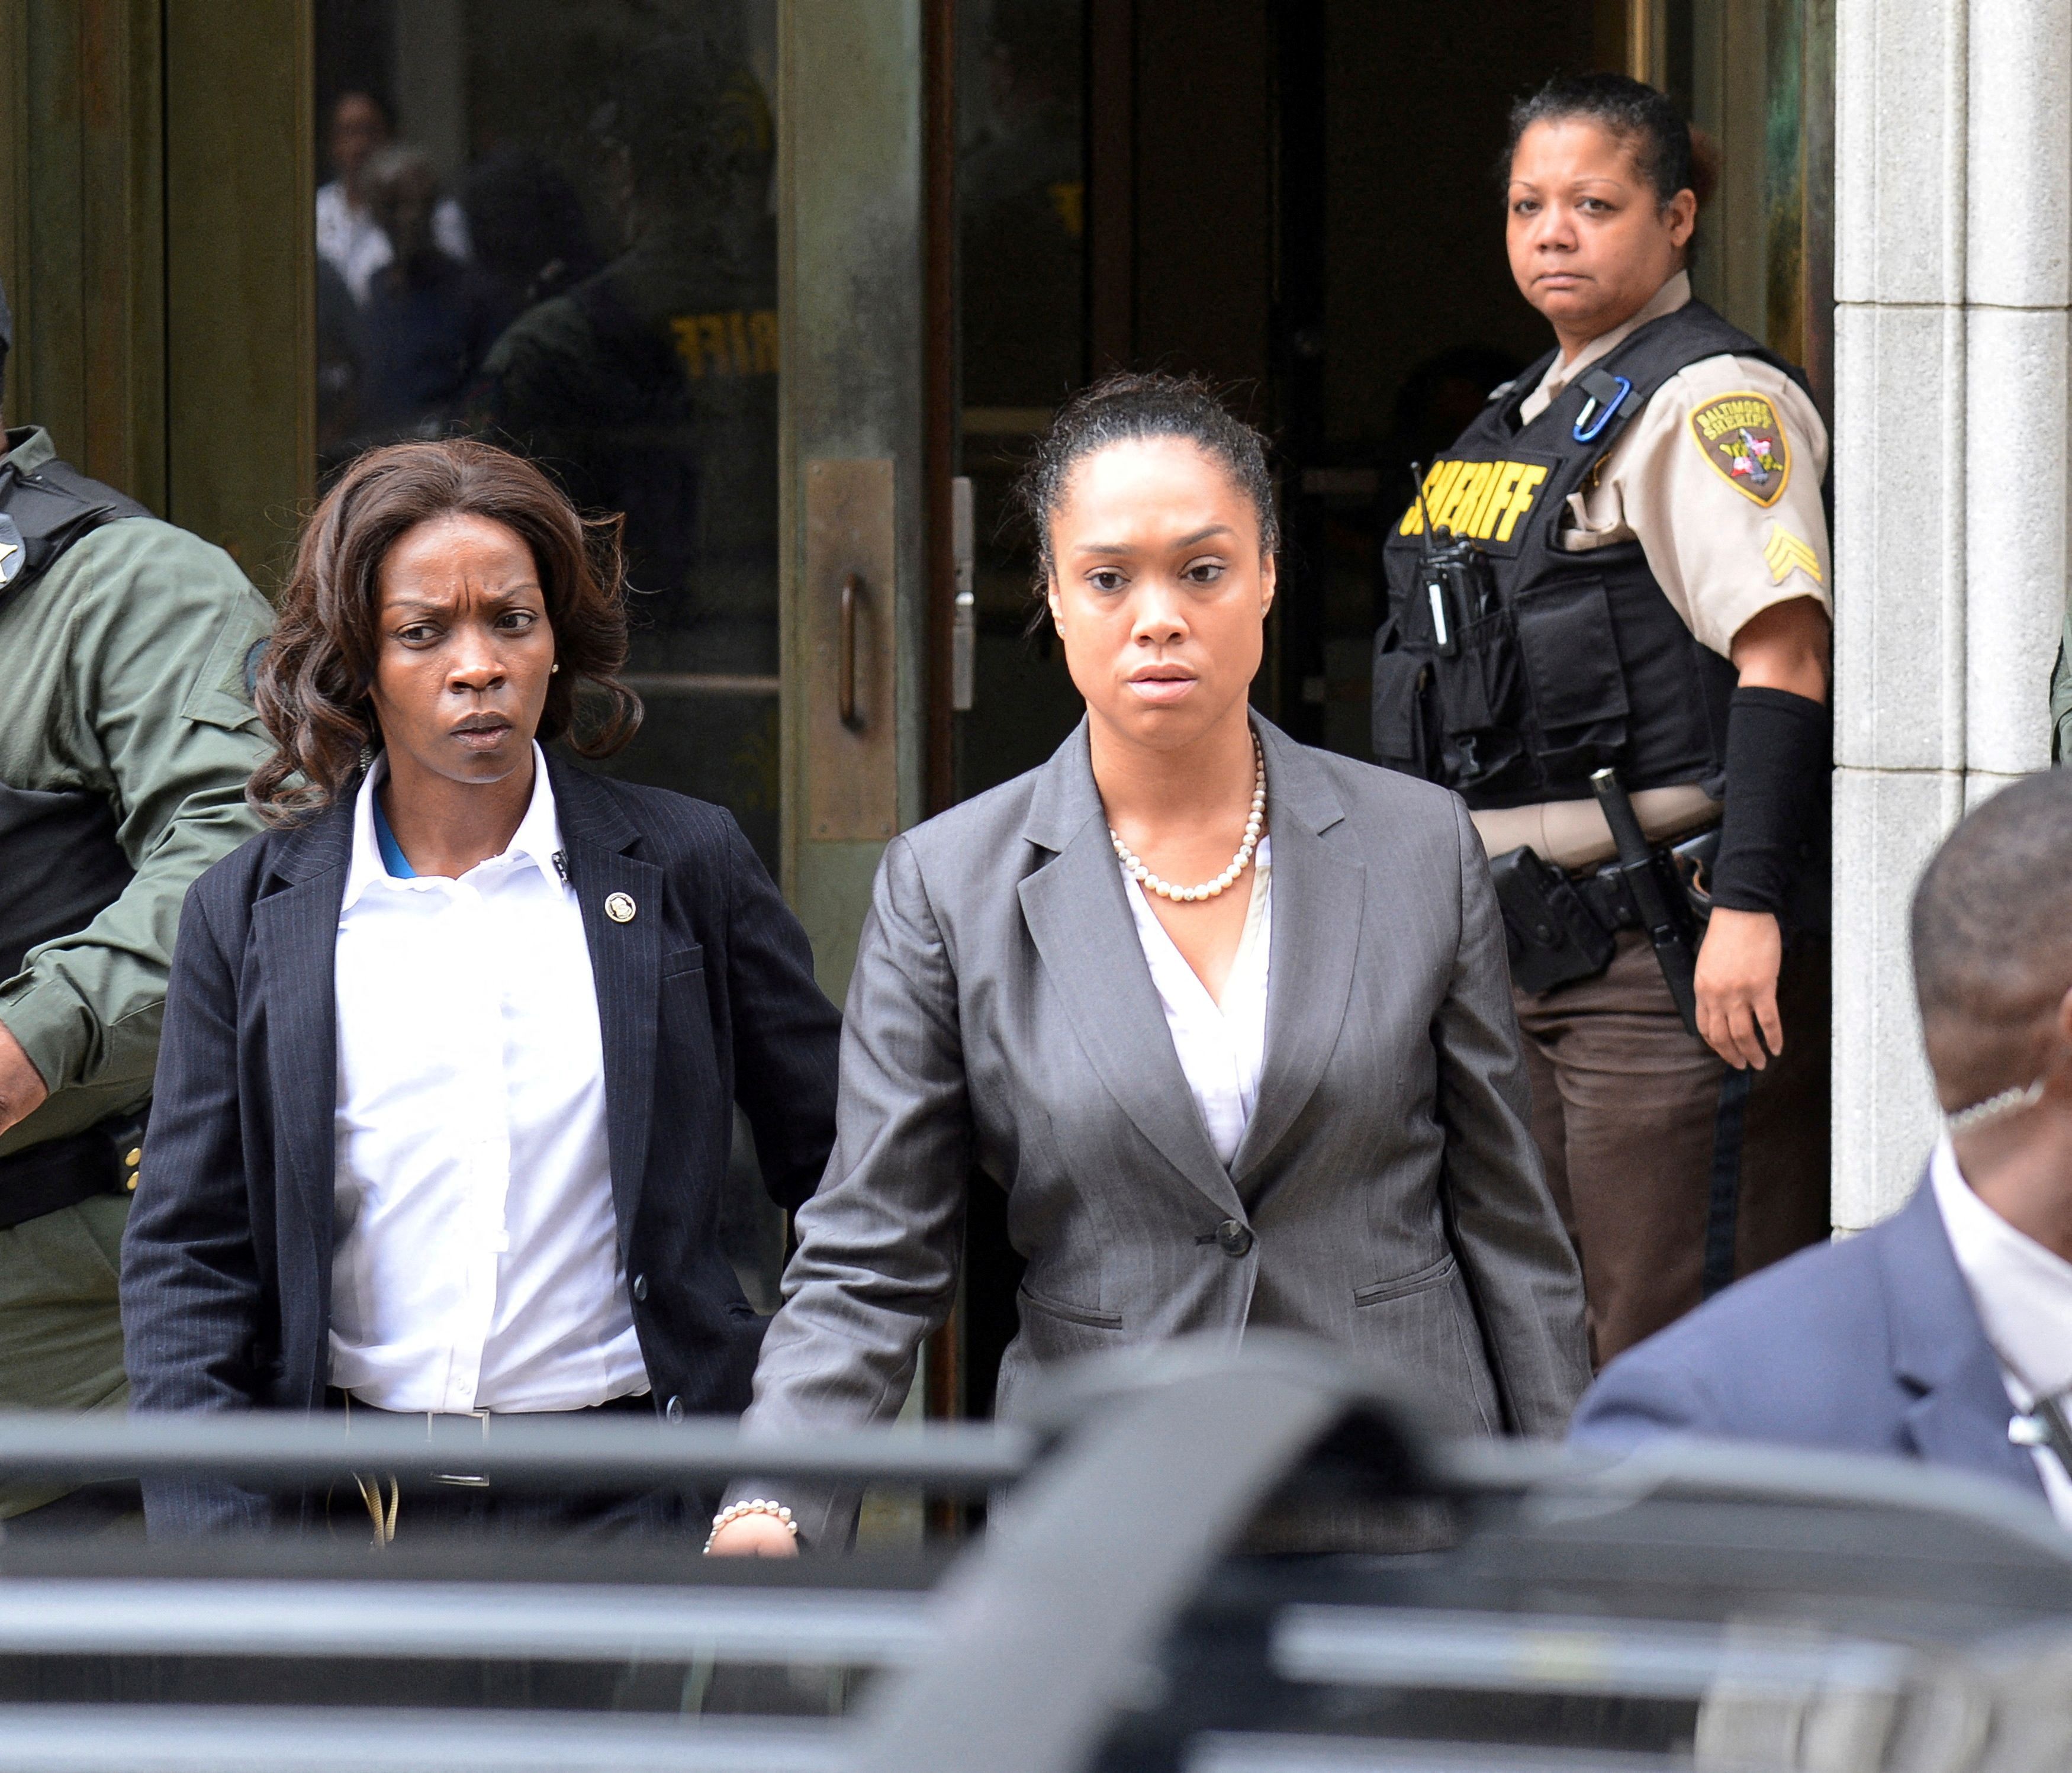 City State's Attorney Marilyn Mosby (C) departs the courthouse in Baltimore, Maryland, U.S. on June 23, 2016. REUTERS/Bryan Woolston